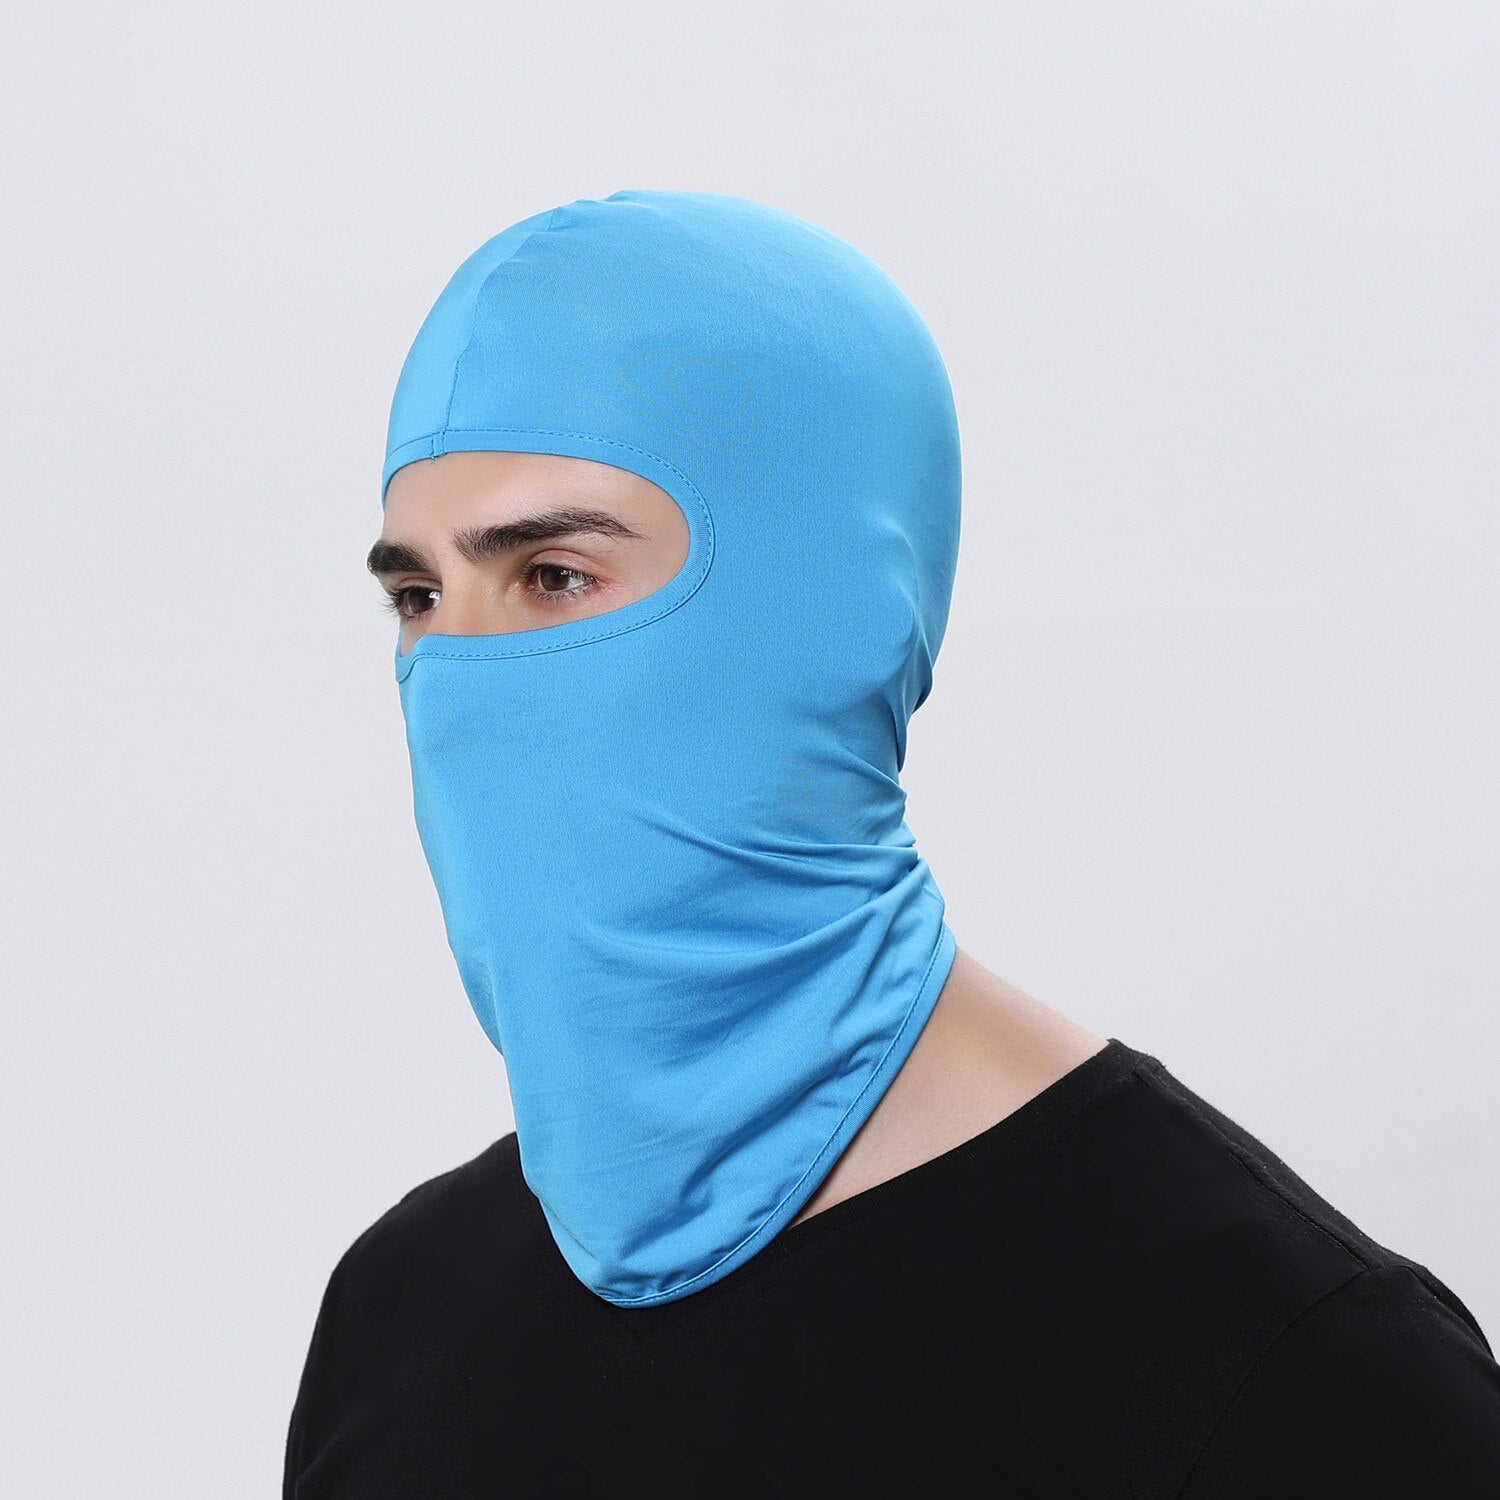 Winter Cycling Face Mask/Balaclava - Unisex, Lycra, All Weather Full Face Mask - 6 Colours (Black, Green, Navy Blue, Light Blue, Light Grey, White)